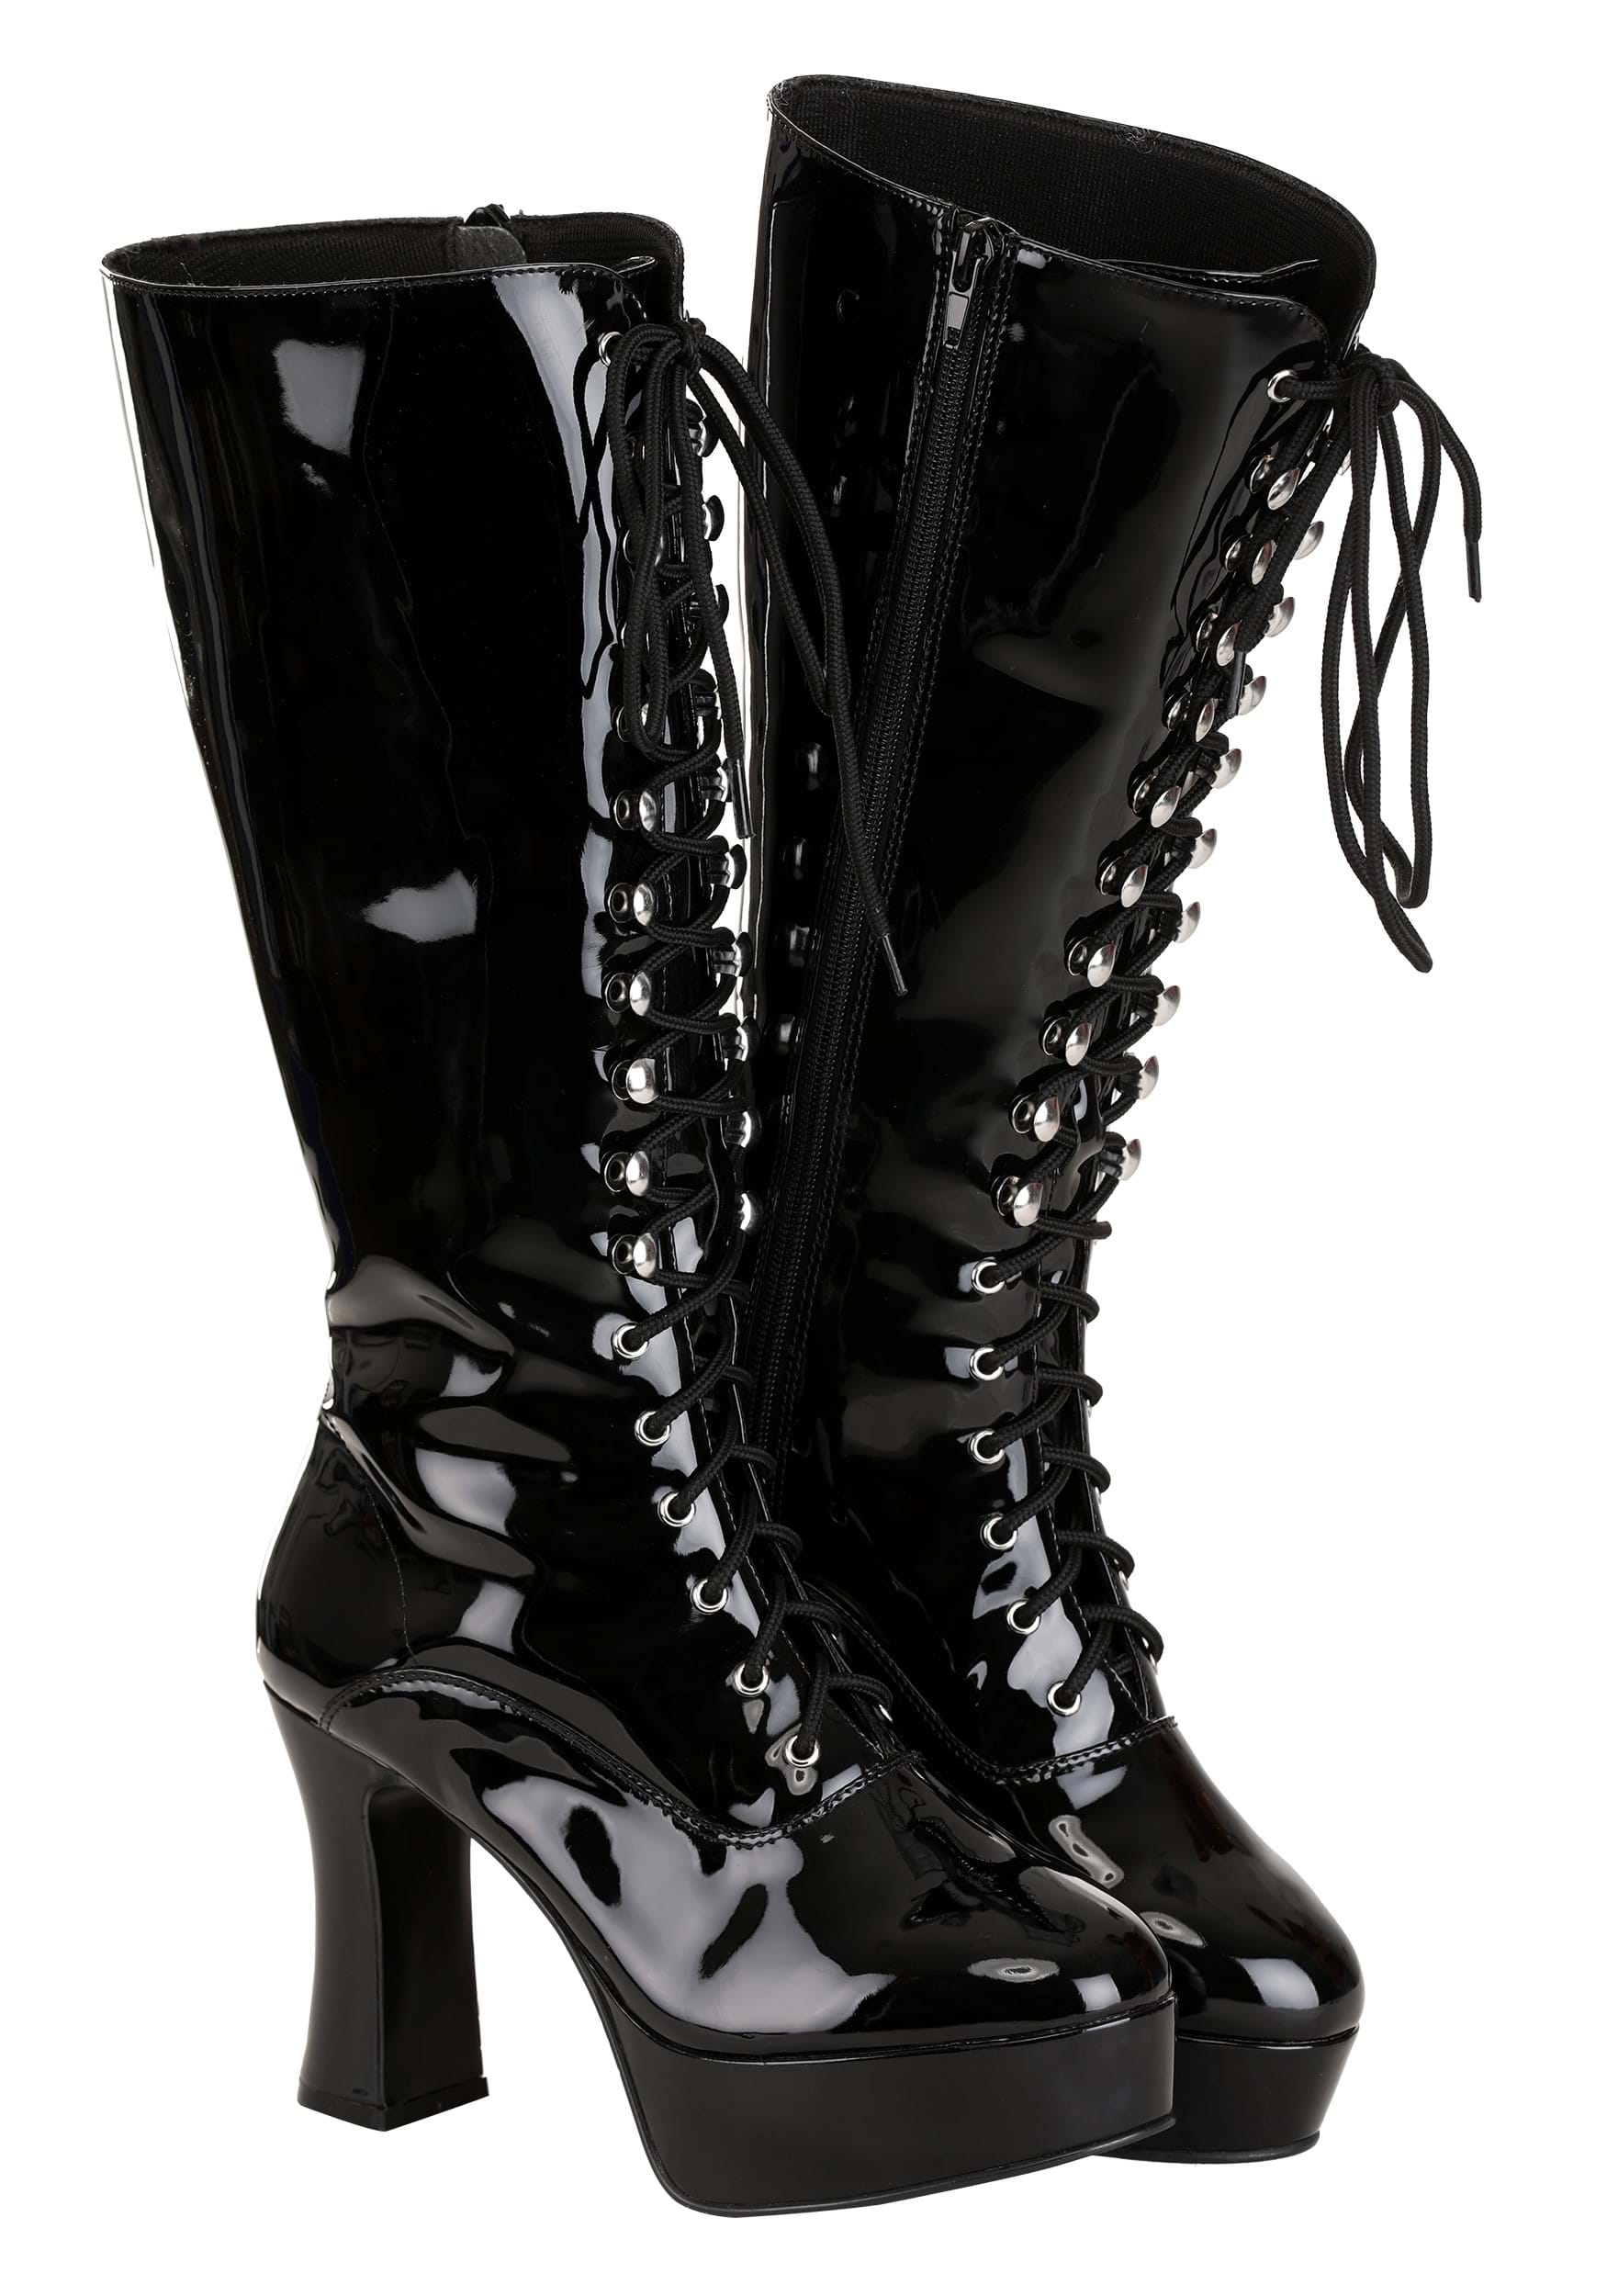 Image of Adult Sexy Black Faux Leather Knee High Boots ID FUN3412AD-12